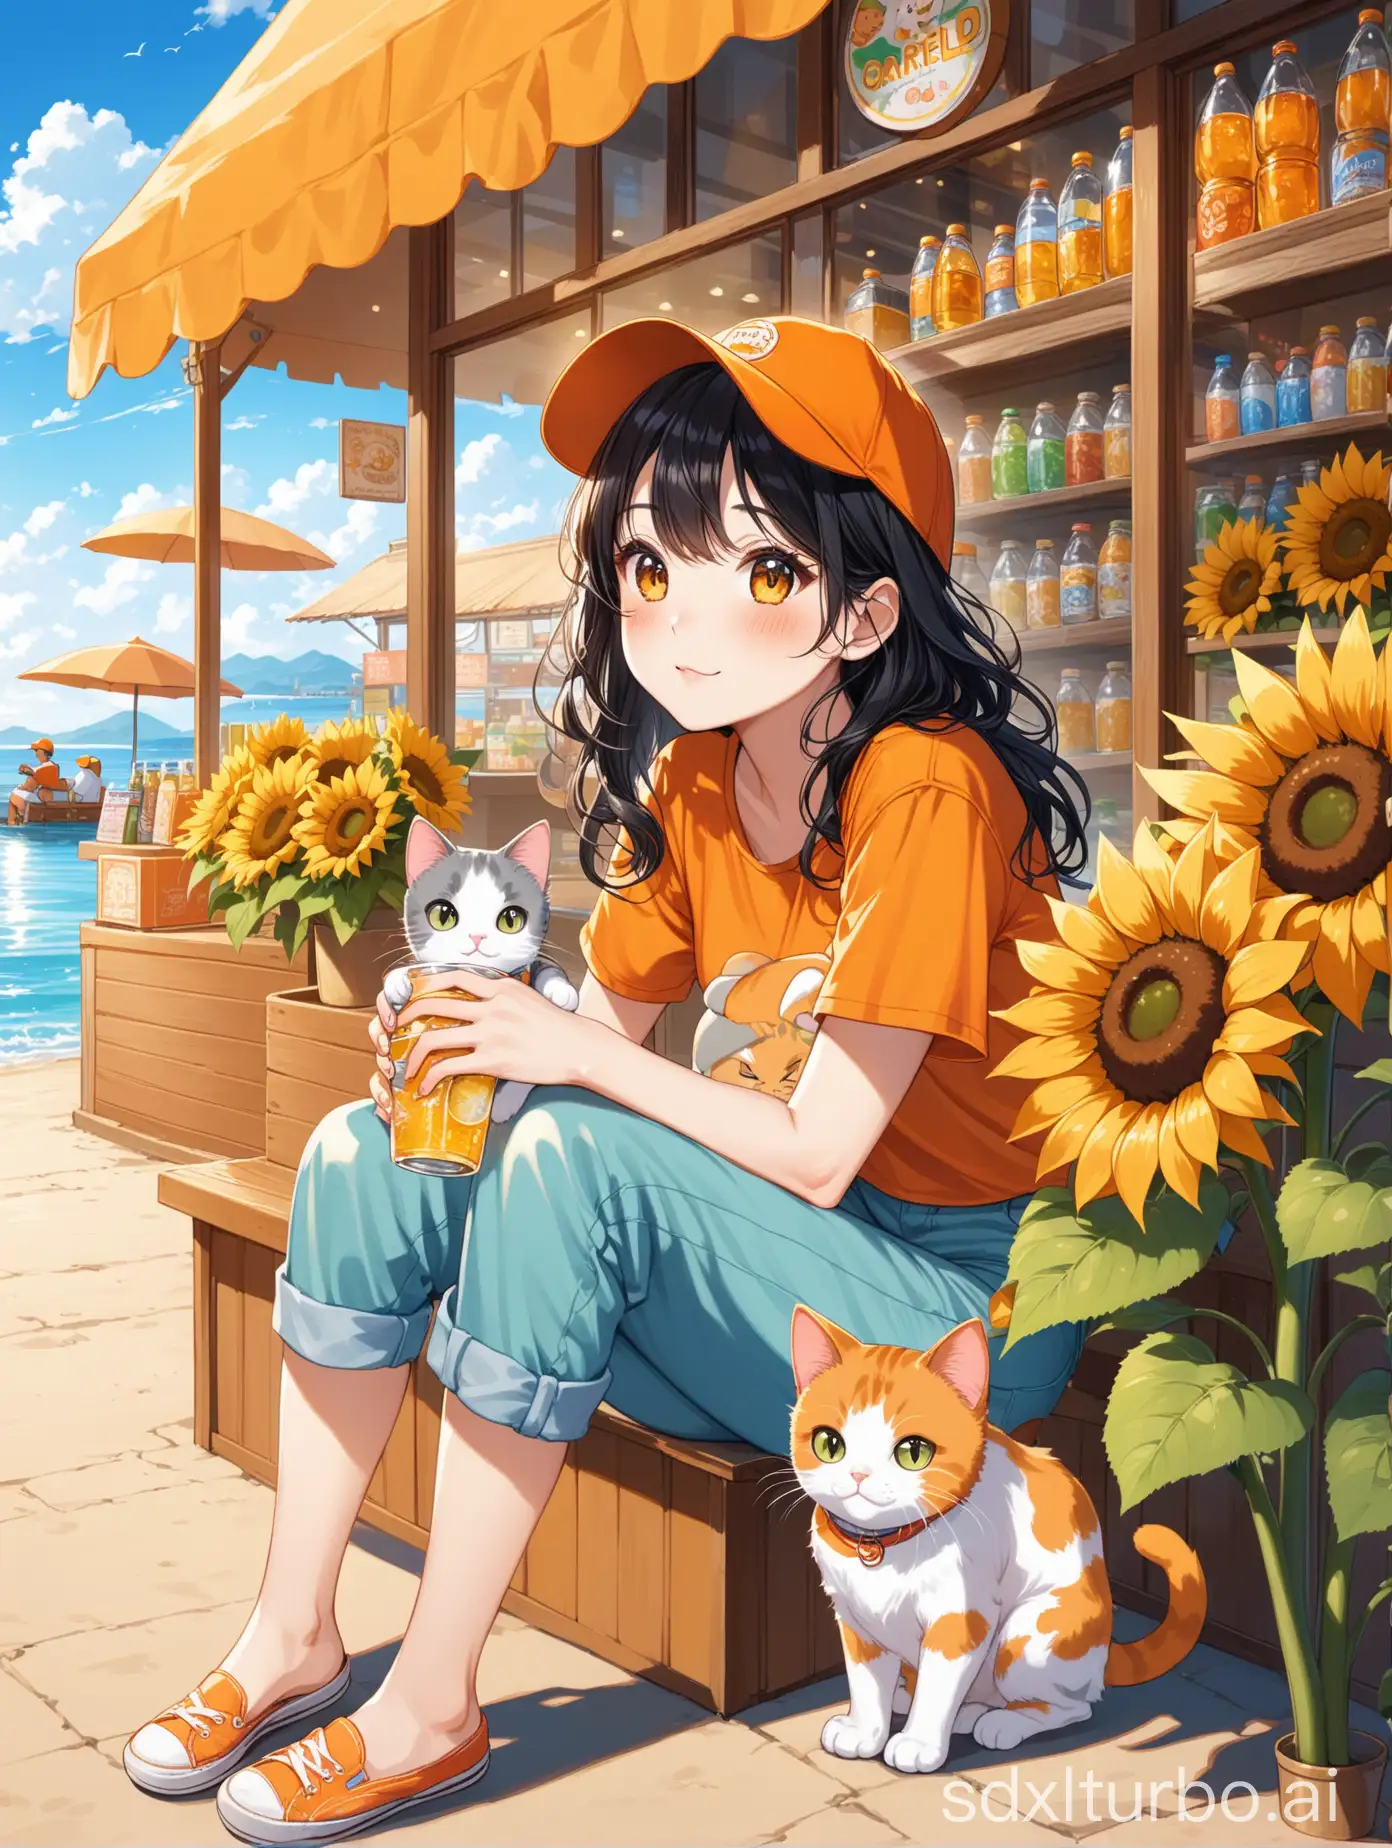 A woman with slightly curled black hair, wearing an orange baseball cap, holding a gray calico cat and an orange Garfield cat, wearing pants and short sleeves, sitting by the sea next to a sunflower-decorated beverage shop drinking water.